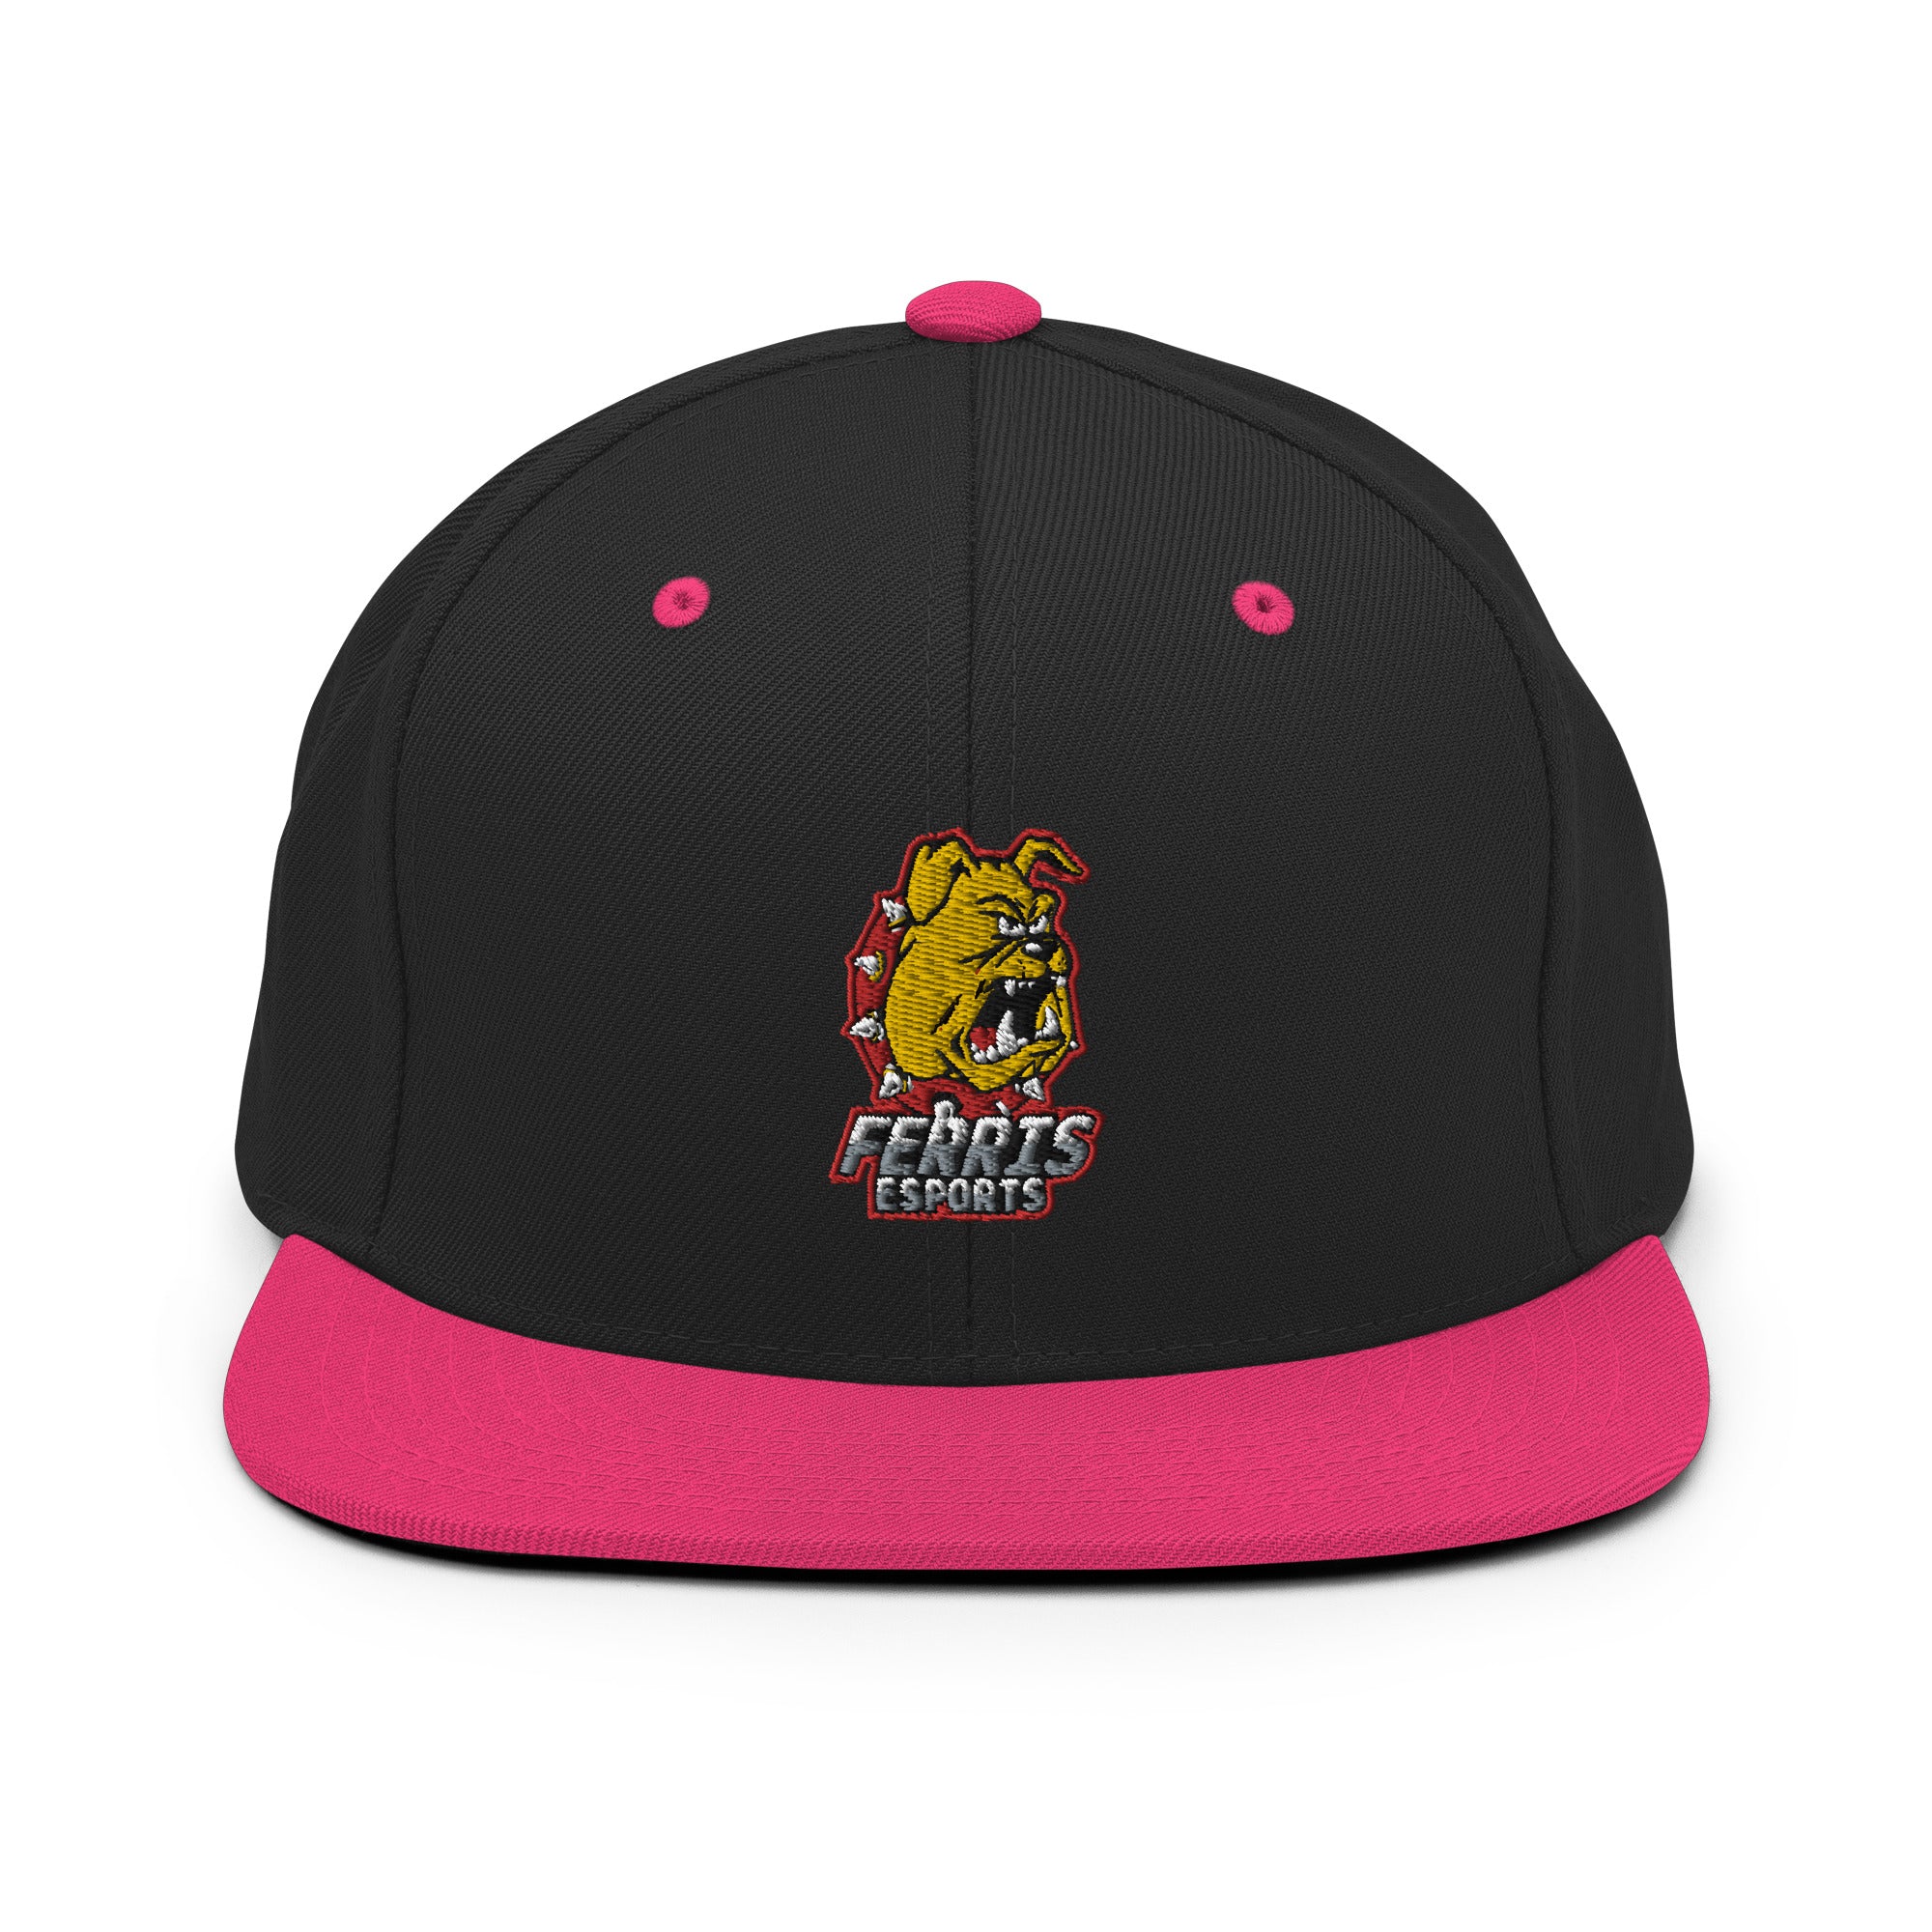 Ferris State Esports | On Demand | Embroidered Snapback Hat